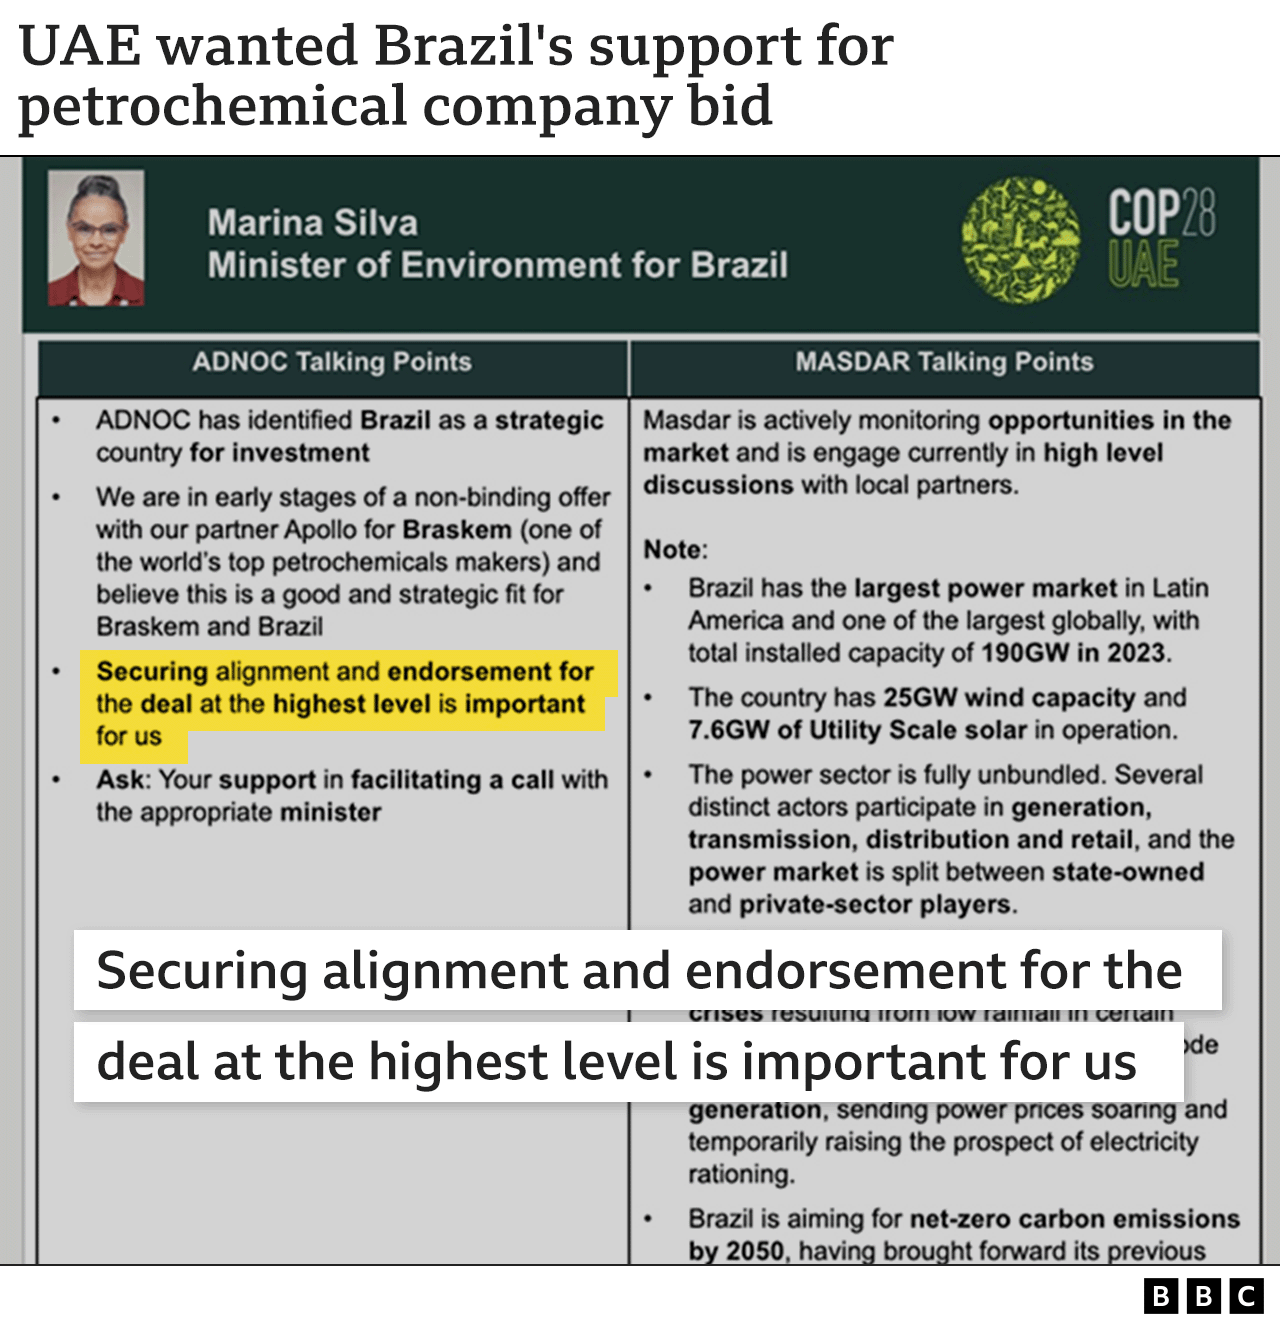 Graphic showing quote from briefing document for the UAE COP28 team's meeting with Brazil's environment minister, mentioning the Braskem deal and saying "Securing alignment and endorsement for the deal at the highest level is important for us"